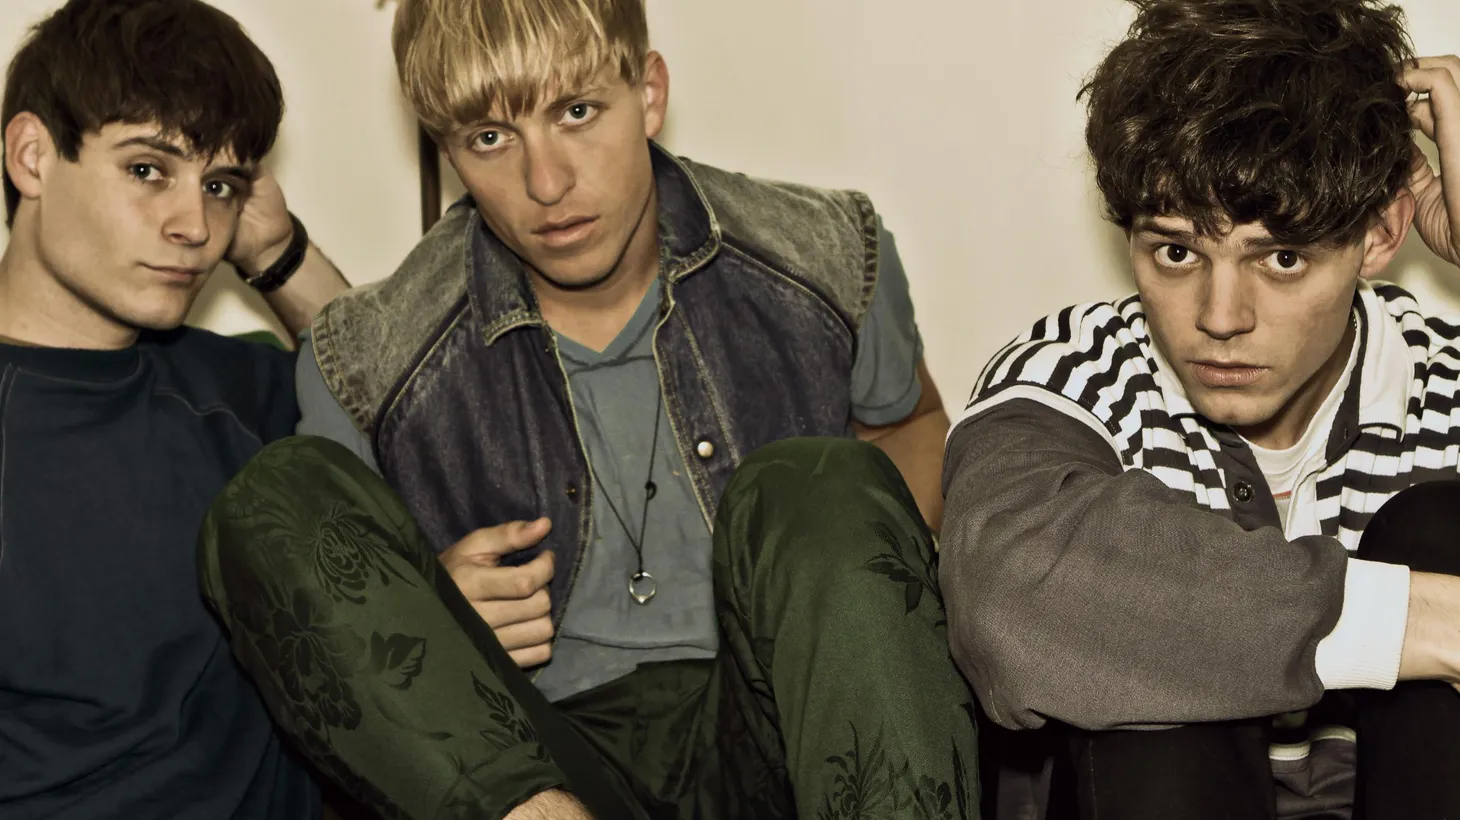 The Drums' clever lyrics and happy melodies are infectious...